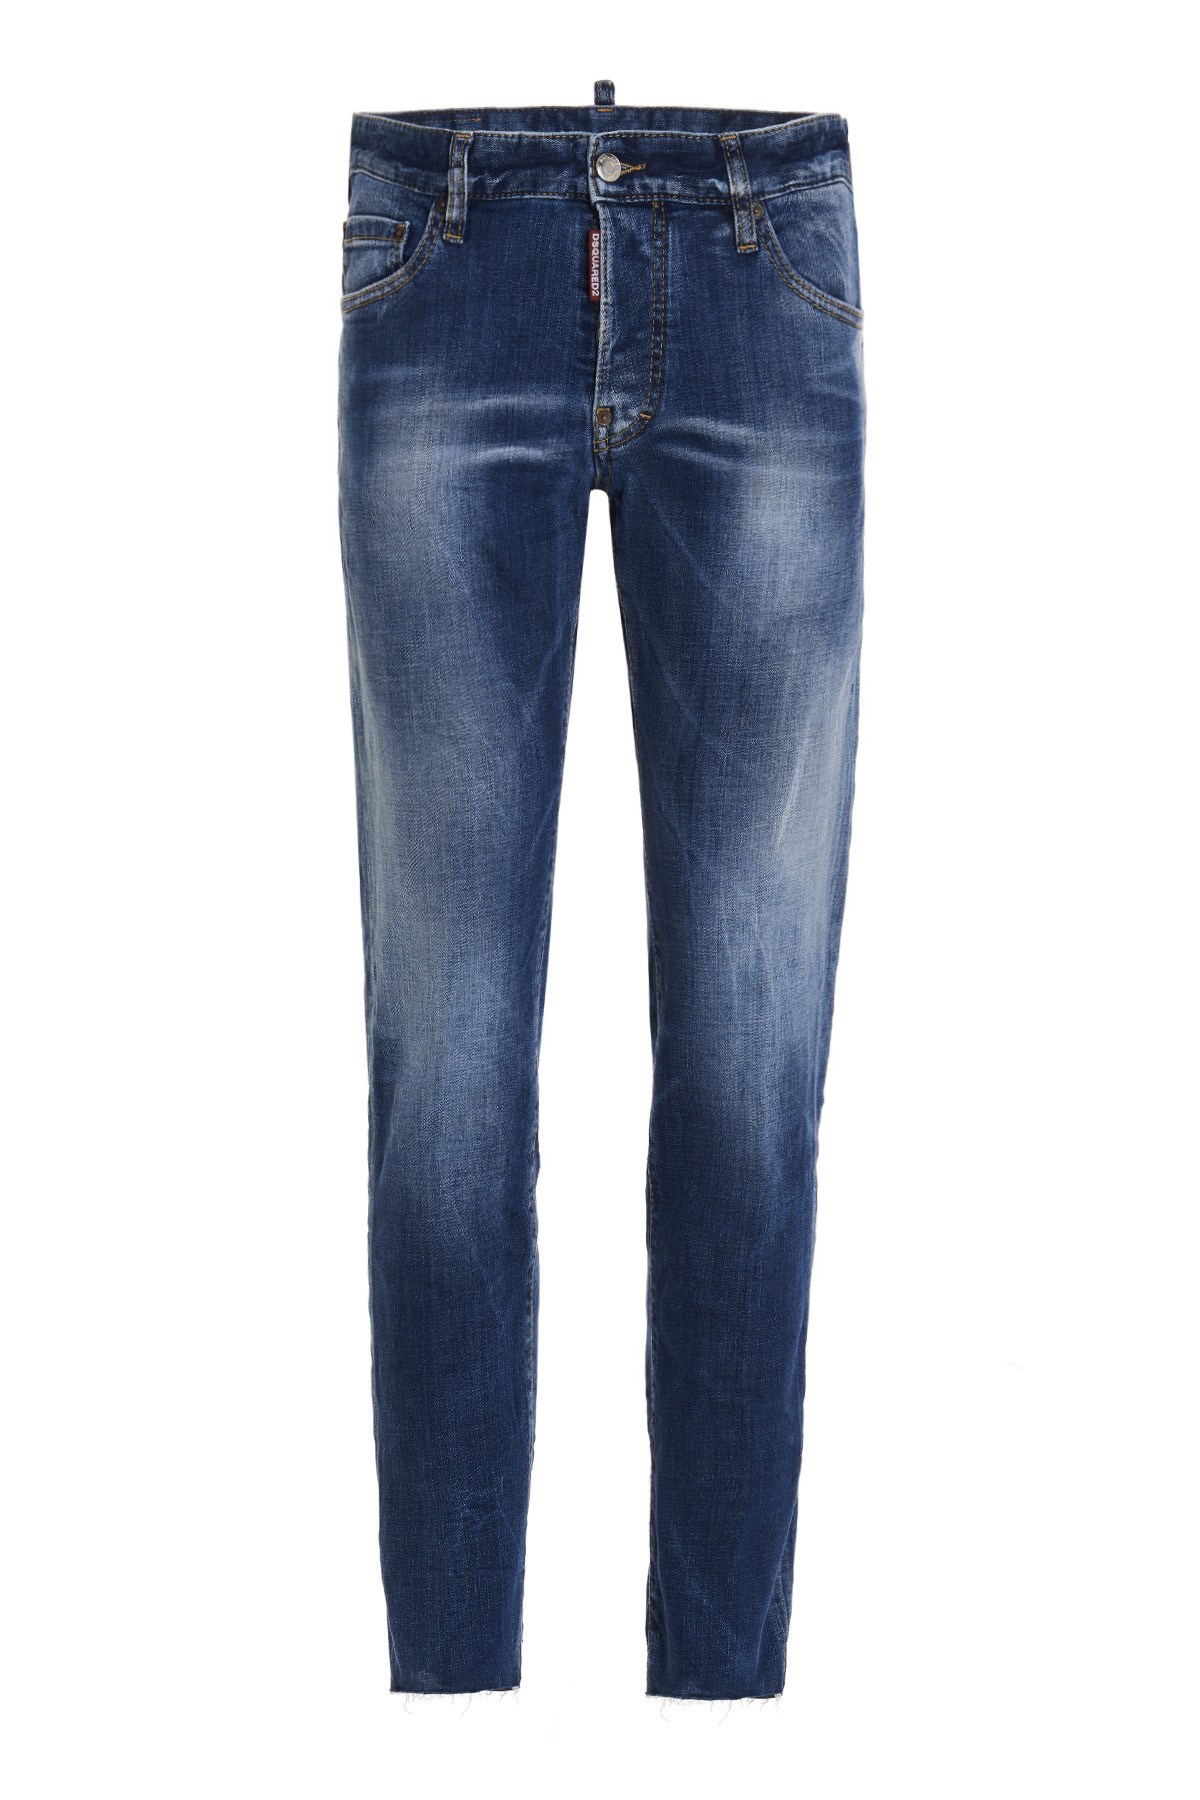 DSQUARED2 'Slim Cropped’ Jeans